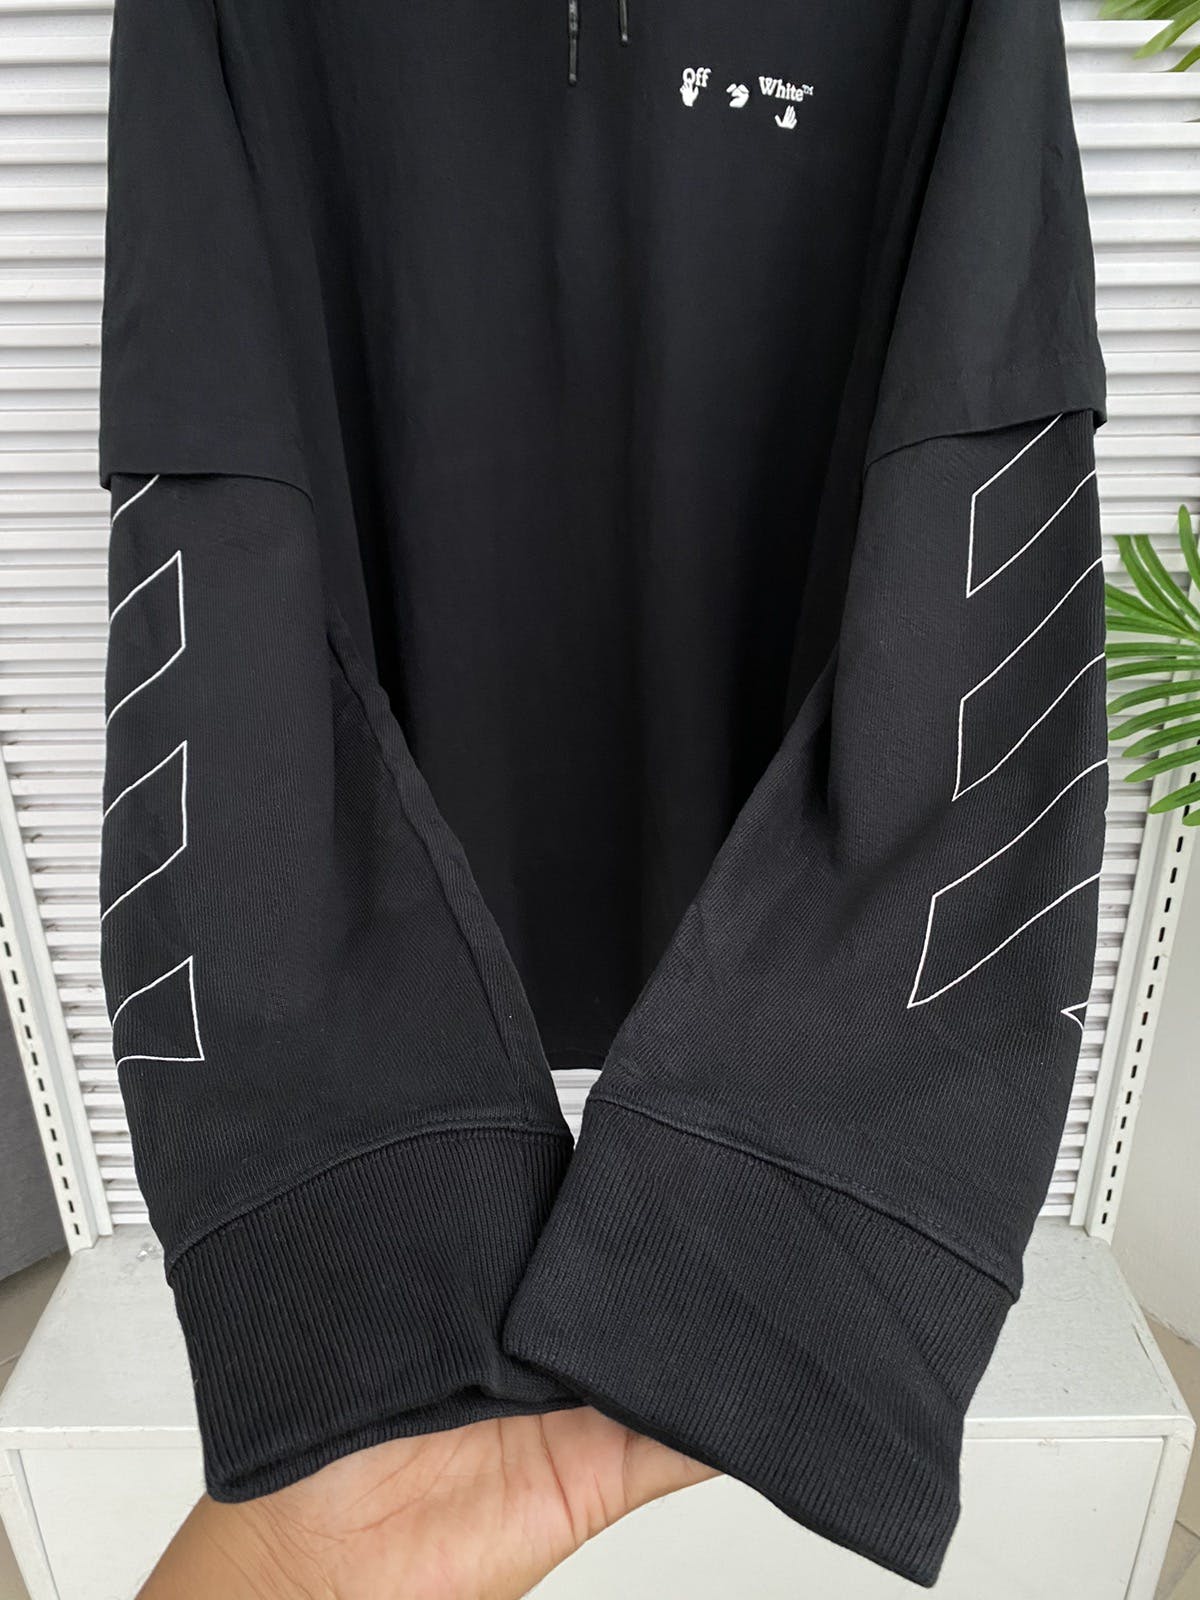 Off-White Virgil Abloh Hoodie Double Layer Connected T-Shirt - 3